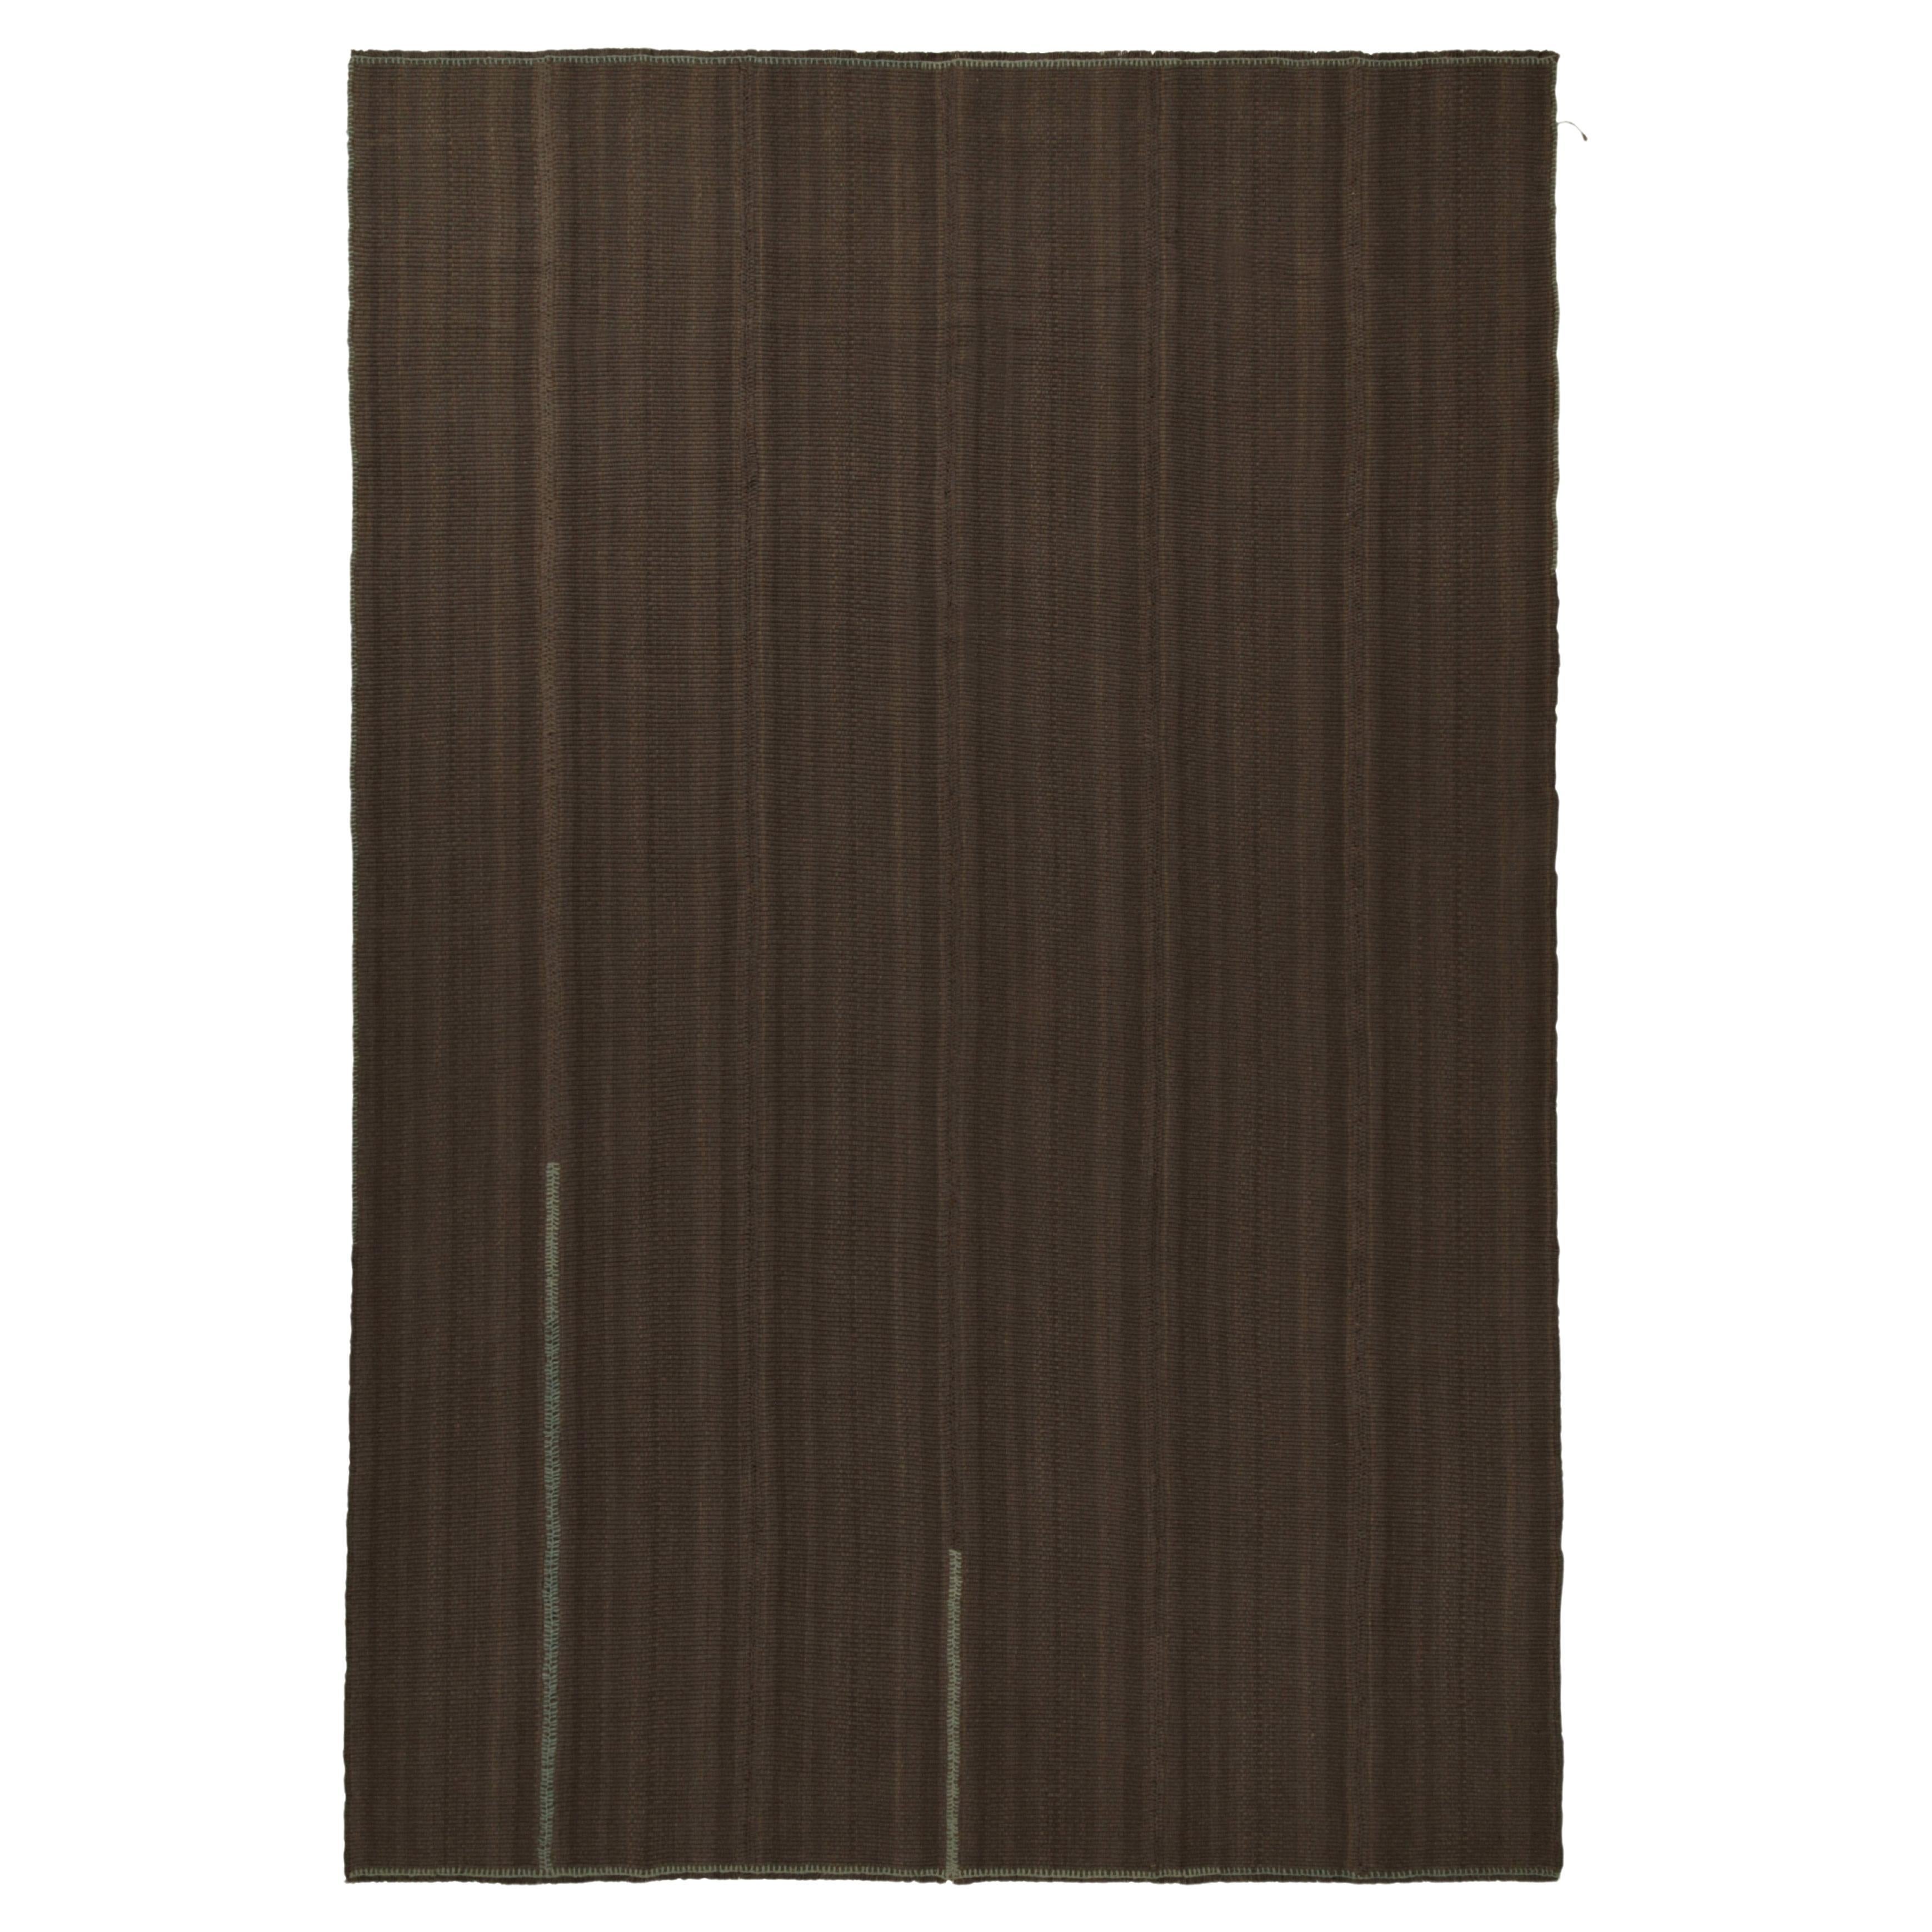 Rug & Kilim’s Contemporary Kilim in Brown & Grey Panel Woven Style For Sale